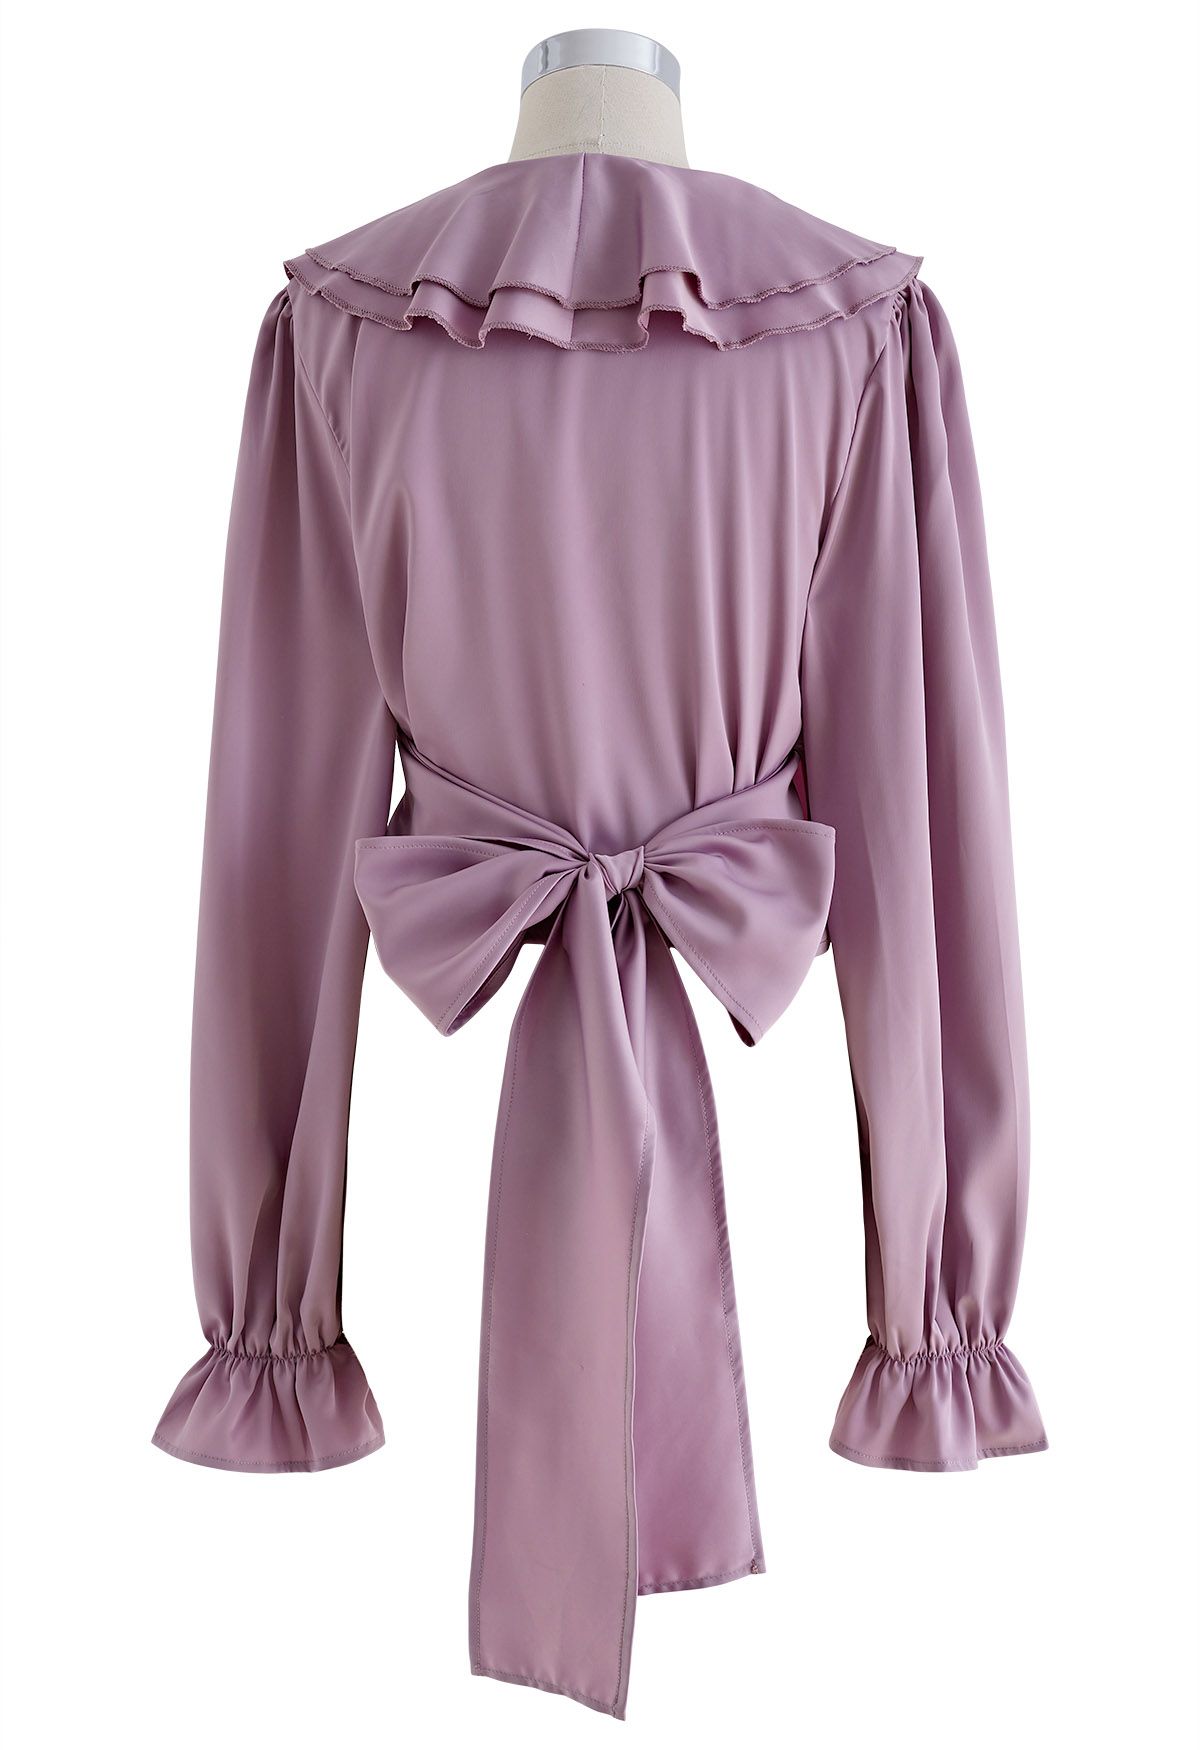 Tiered Ruffle Collar Satin Wrap Top - Retro, Indie and Unique Fashion